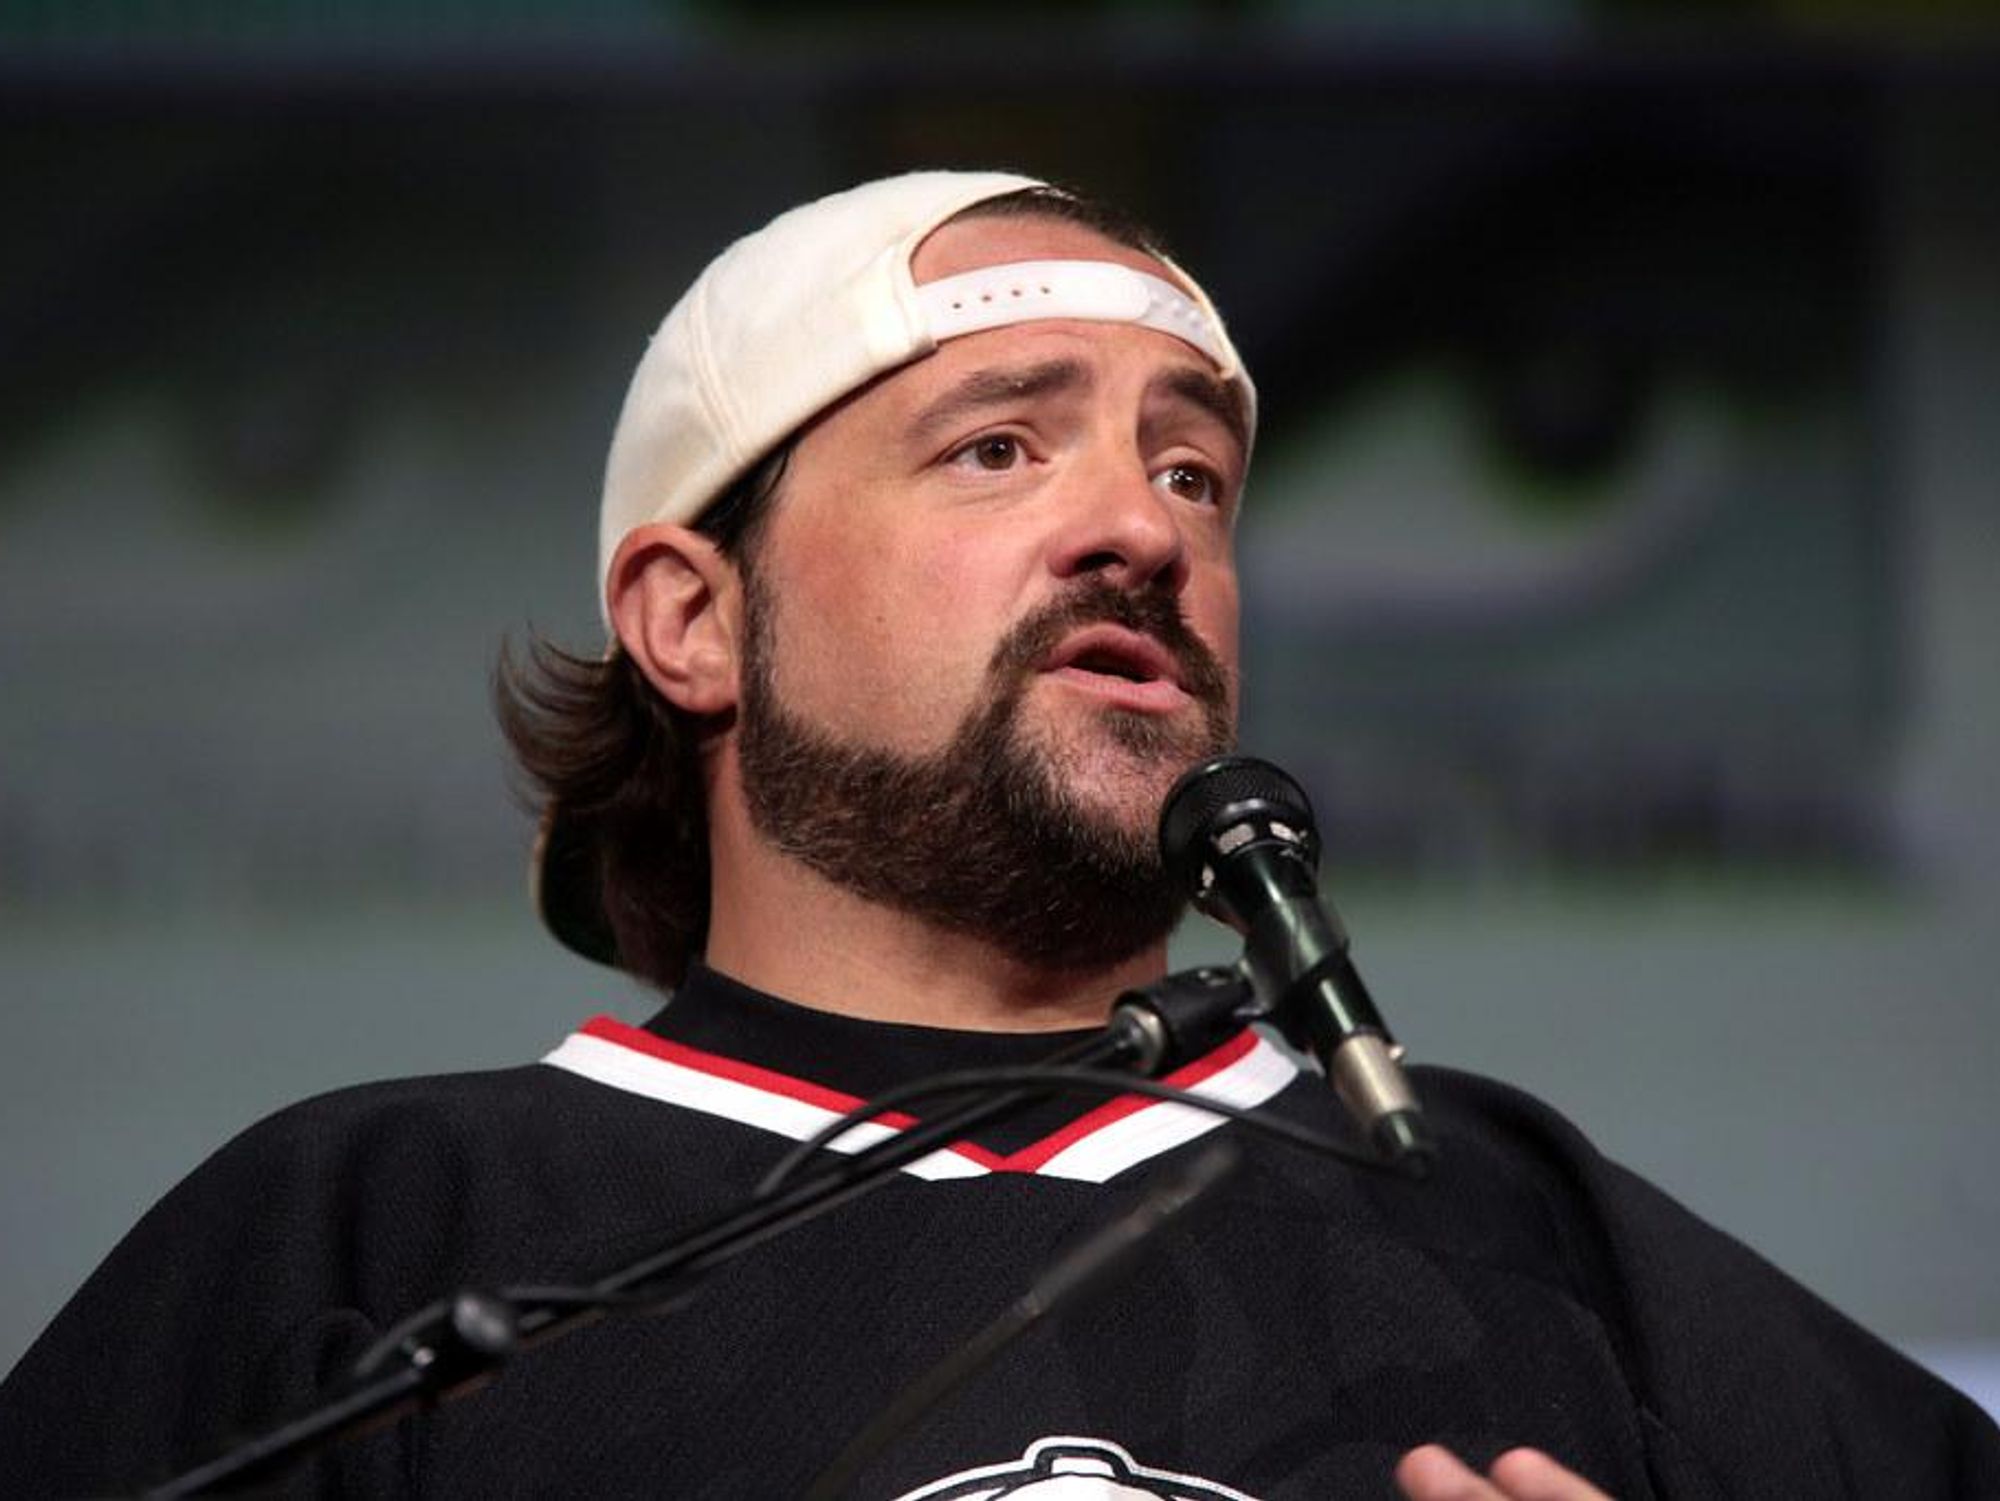 Kevin Smith’s New Movie Will Be an NFT-Exclusive Release